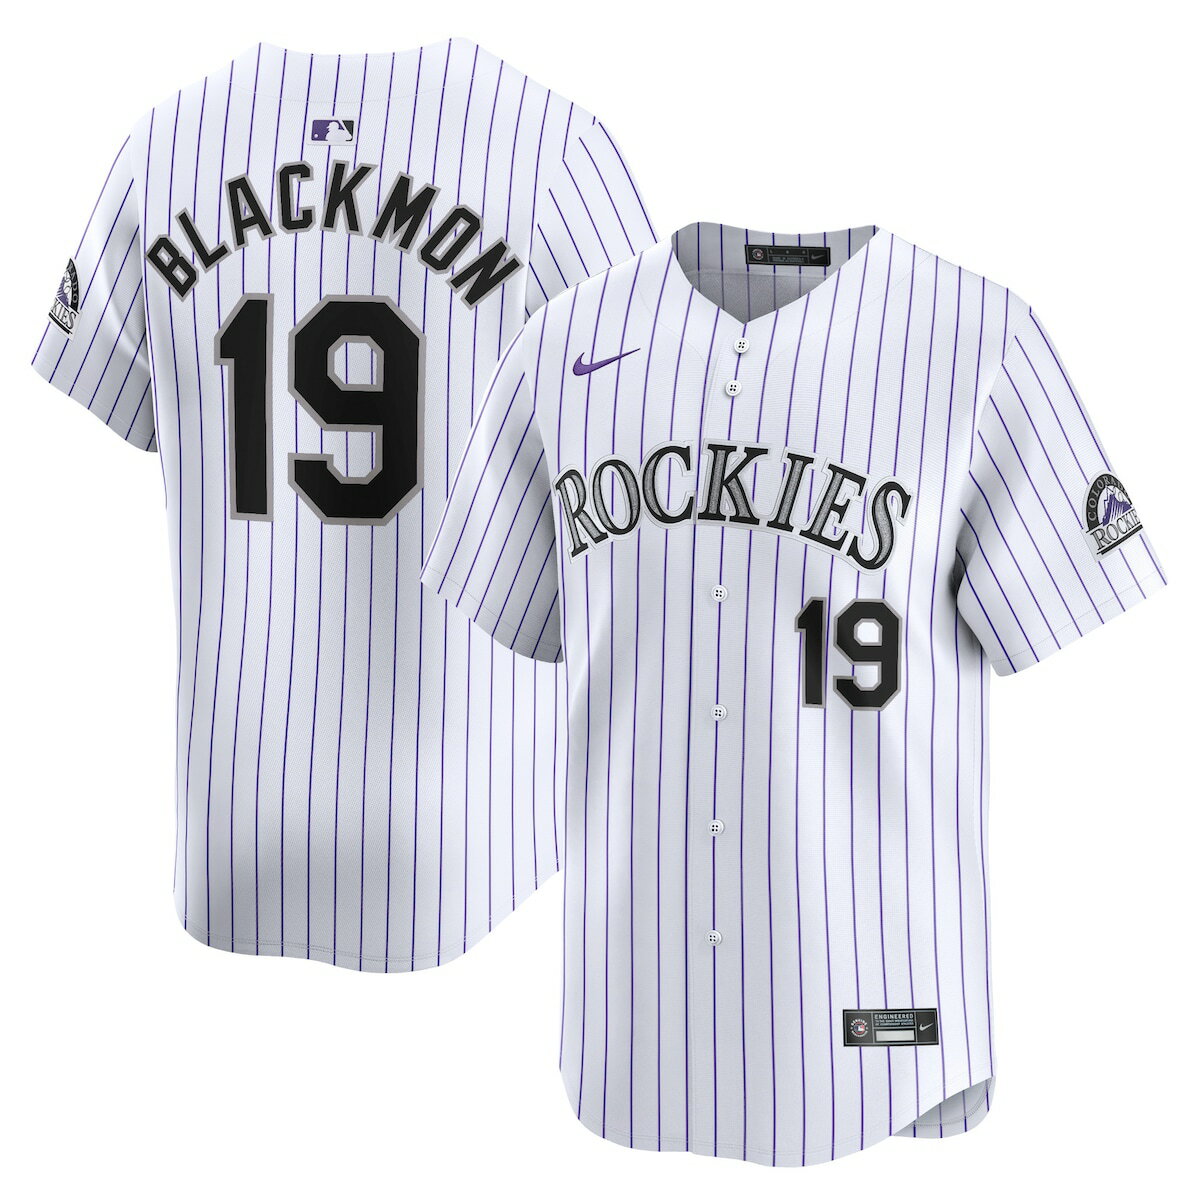 This Charlie Blackmon Limited jersey is inspired by the on-field uniforms of your Colorado Rockies and keeps your young fan comfortable beyond the last out. Crafted by Nike using the lightweight comfort of stretch mesh fabric, it features an authentic look with twill details. The innovative Vapor Premier chassis allows for more flexible movement and teams up with Dri-FIT ADV technology to deliver exceptional sweat-wicking powerFull-button frontNike LimitedVapor Premier chassis is made with breathable, high-performance fabric that improves mobility and moisture managementJersey Color Style: HomeHeat-applied woven MLB Batterman and jock tagMaterial: 100% Recycled PolyesterEmbroidered Swoosh logoNike Limited jersey is inspired by the on-field uniform of your favorite teamMove To Zero is Nike's journey toward zero carbon and zero waste to help protect the future of sport. Apparel labeled sustainable materials is made with at least 55% recycled content.Sublimated sleeve patches and front numbers (where applicable)ImportedSublimated twill back player name and numbersStandard fitMachine wash, tumble dry lowShort sleeveDri-FIT ADV technology combines moisture-wicking fabric with advanced engineering and features to help you stay dry and comfortableRecycled trims and twill details help provide a more authentic look and feelRounded hemHeat-sealed twill front logo or wordmark with zigzag stitchingBrand: NikeOfficially licensed